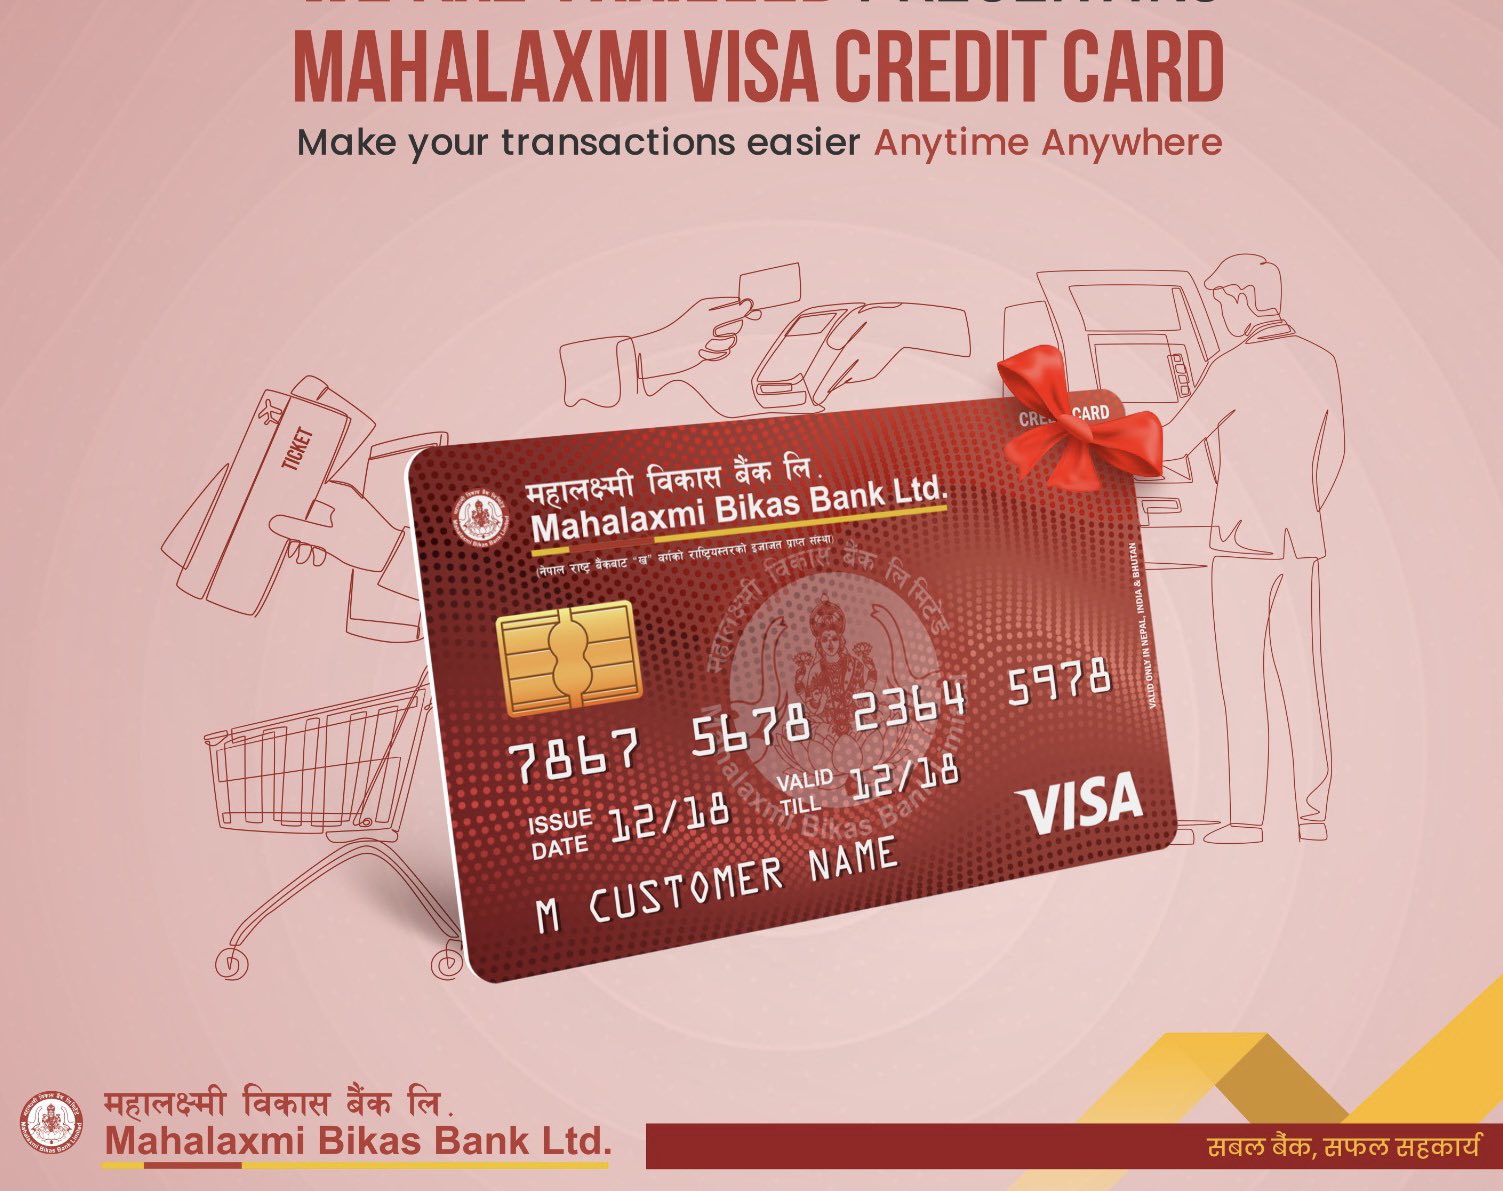 Mahalaxmi Bikas Bank launched credit card service, such is the features